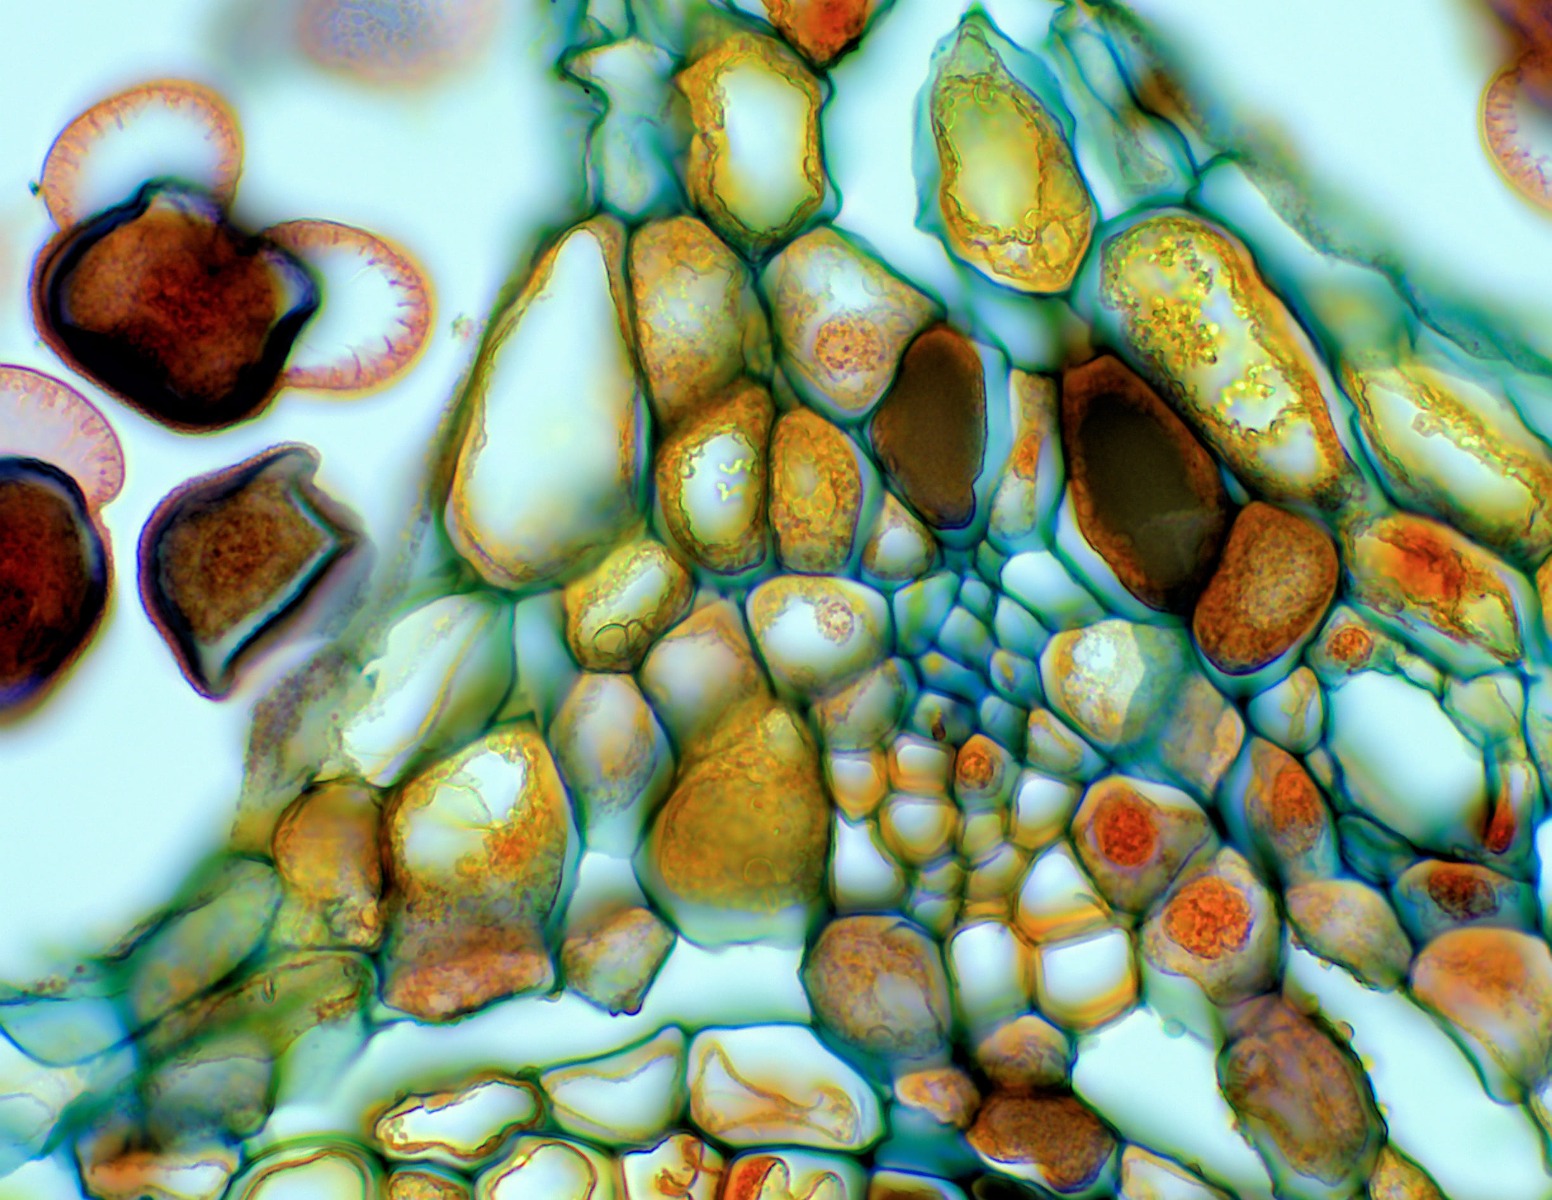 Male pine cone seen under the Motic Panthera C microscope